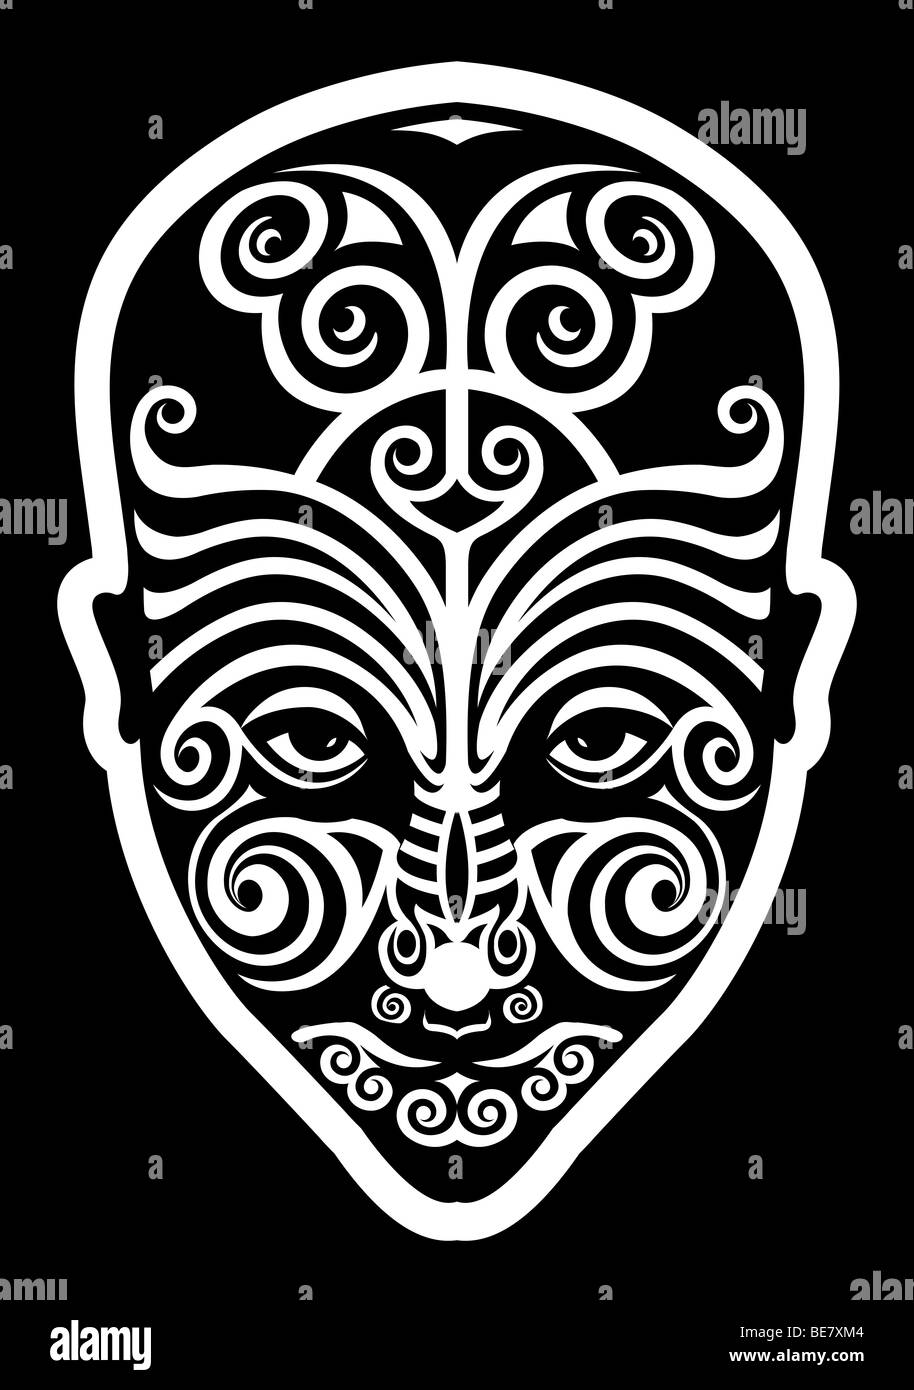 stylized traditional maori tribal face tattoo of indigenous people in new zealand Stock Photo